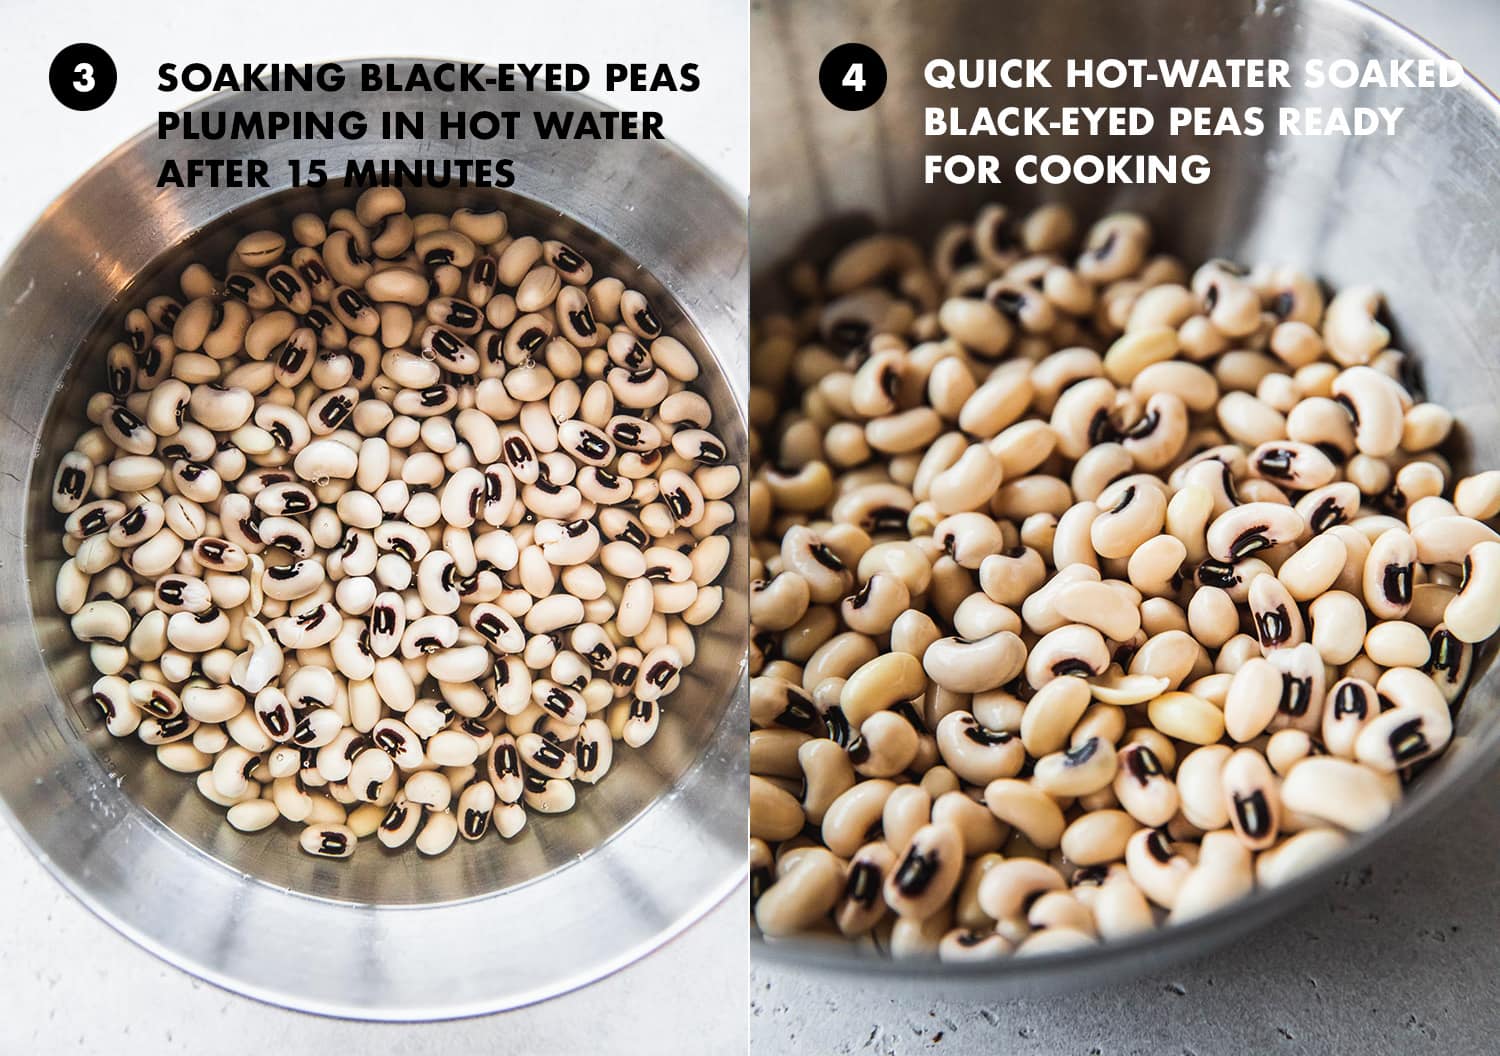 Quick hot-soak method to plump black-eyed peas in 15 minutes by soaking them in boiling water.